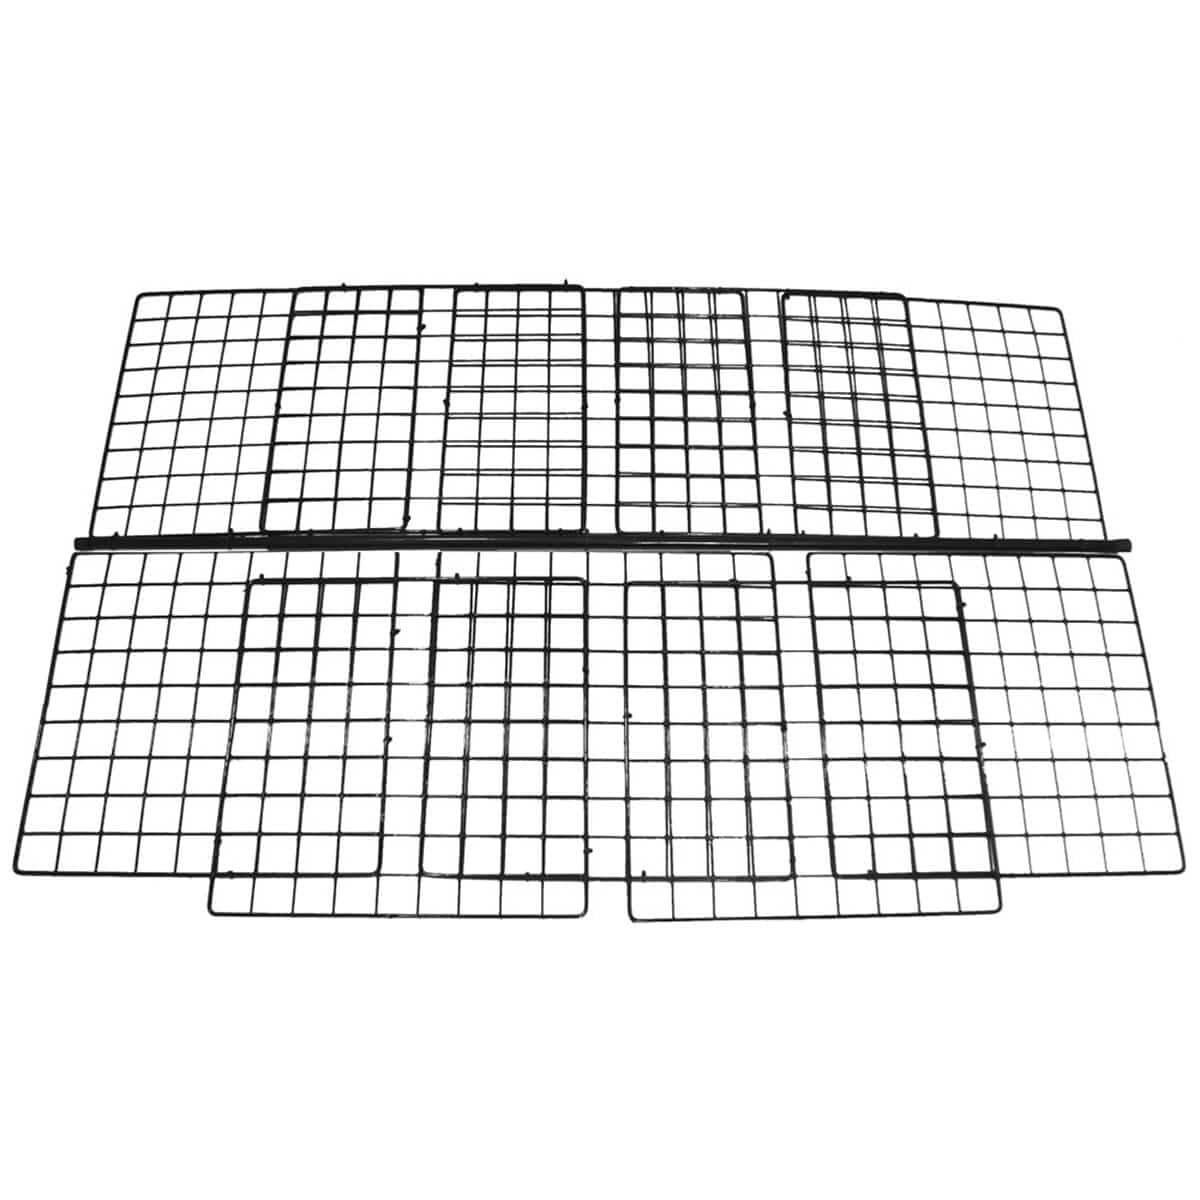 Black grids and rods comprising a small cover for a C&C guinea pig cage